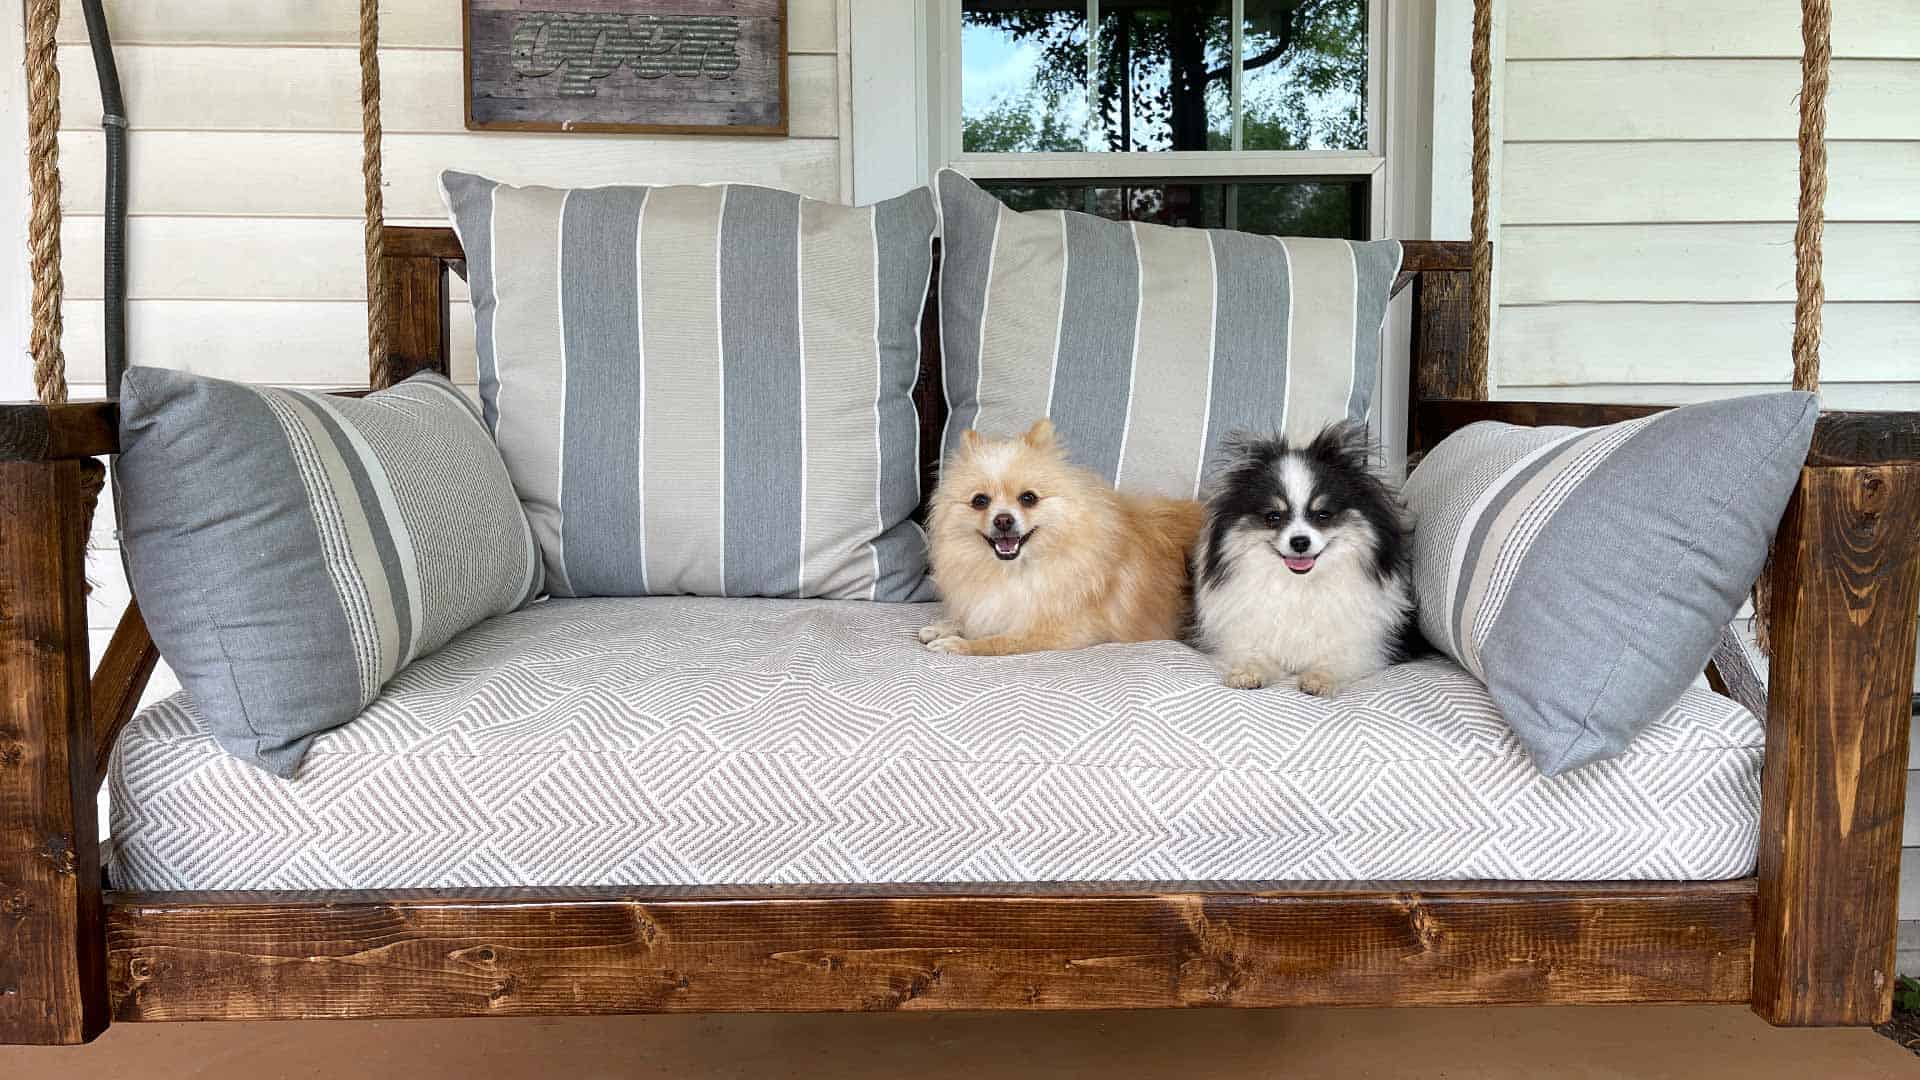 Dogs on a DIY porch swing